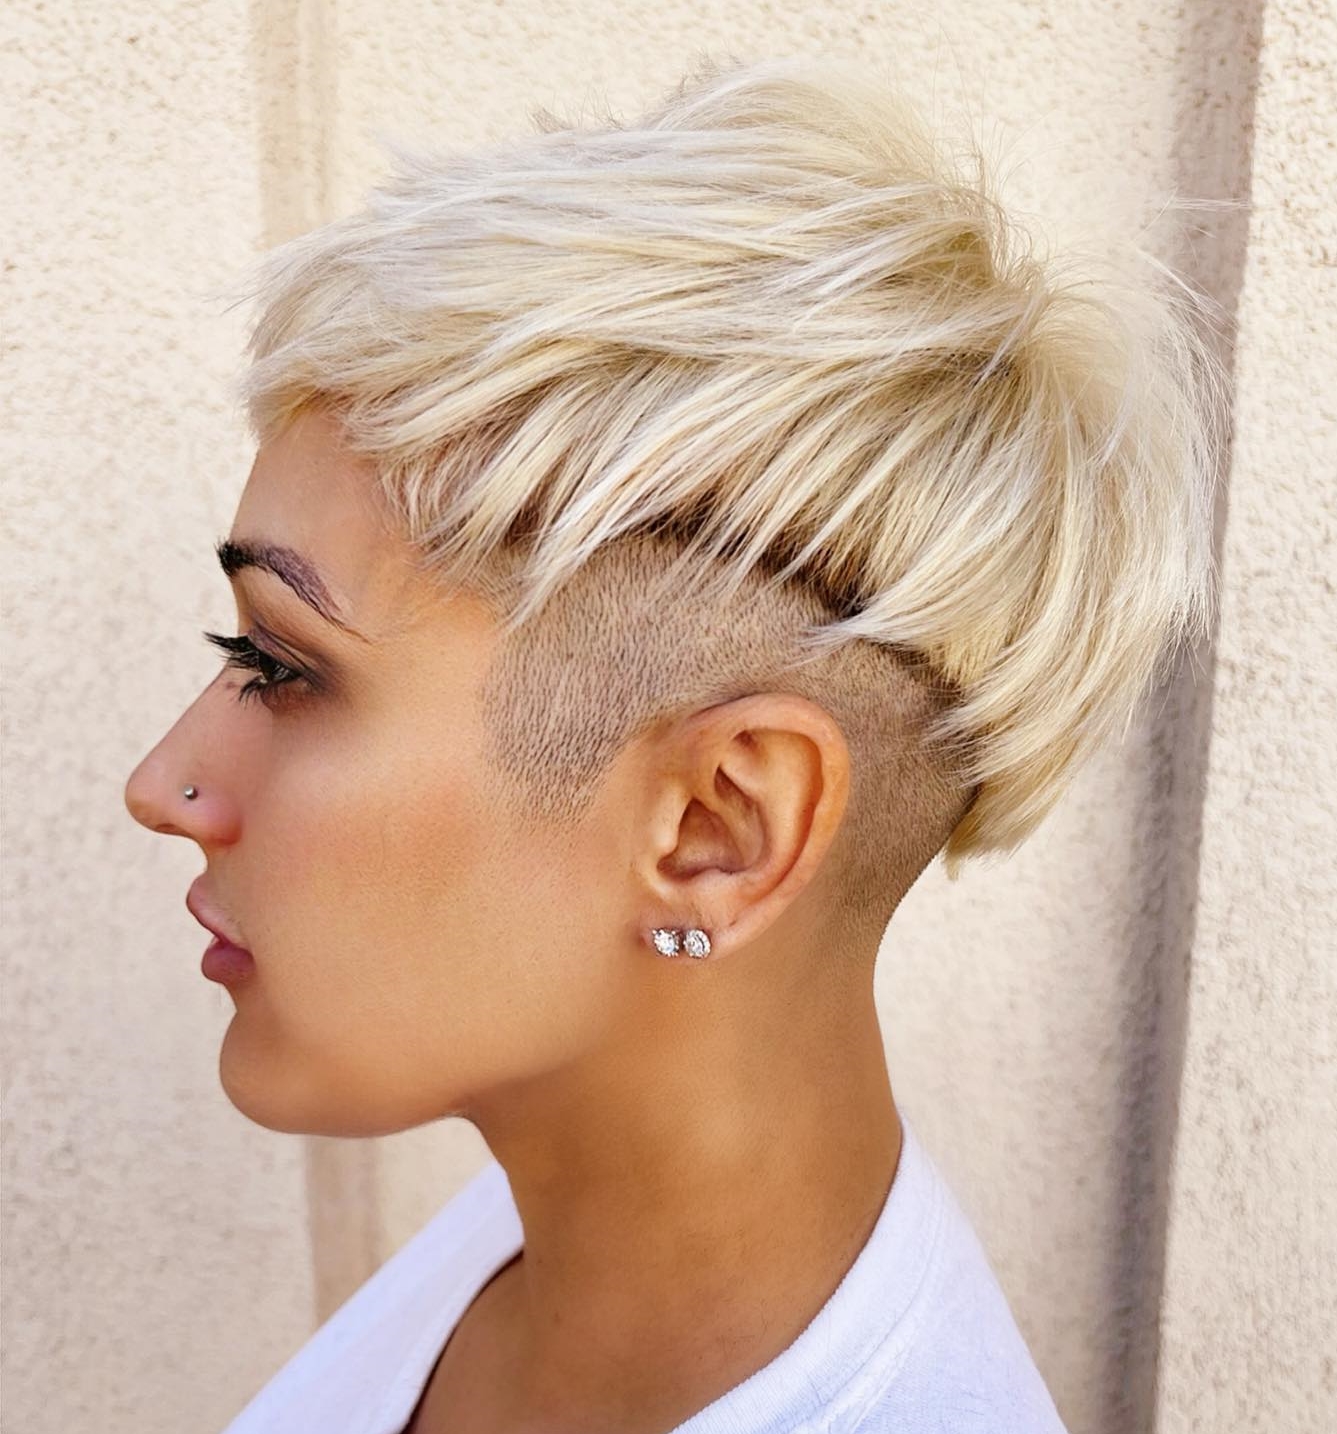 Short Blonde Pixie Cut with Shaved Sides